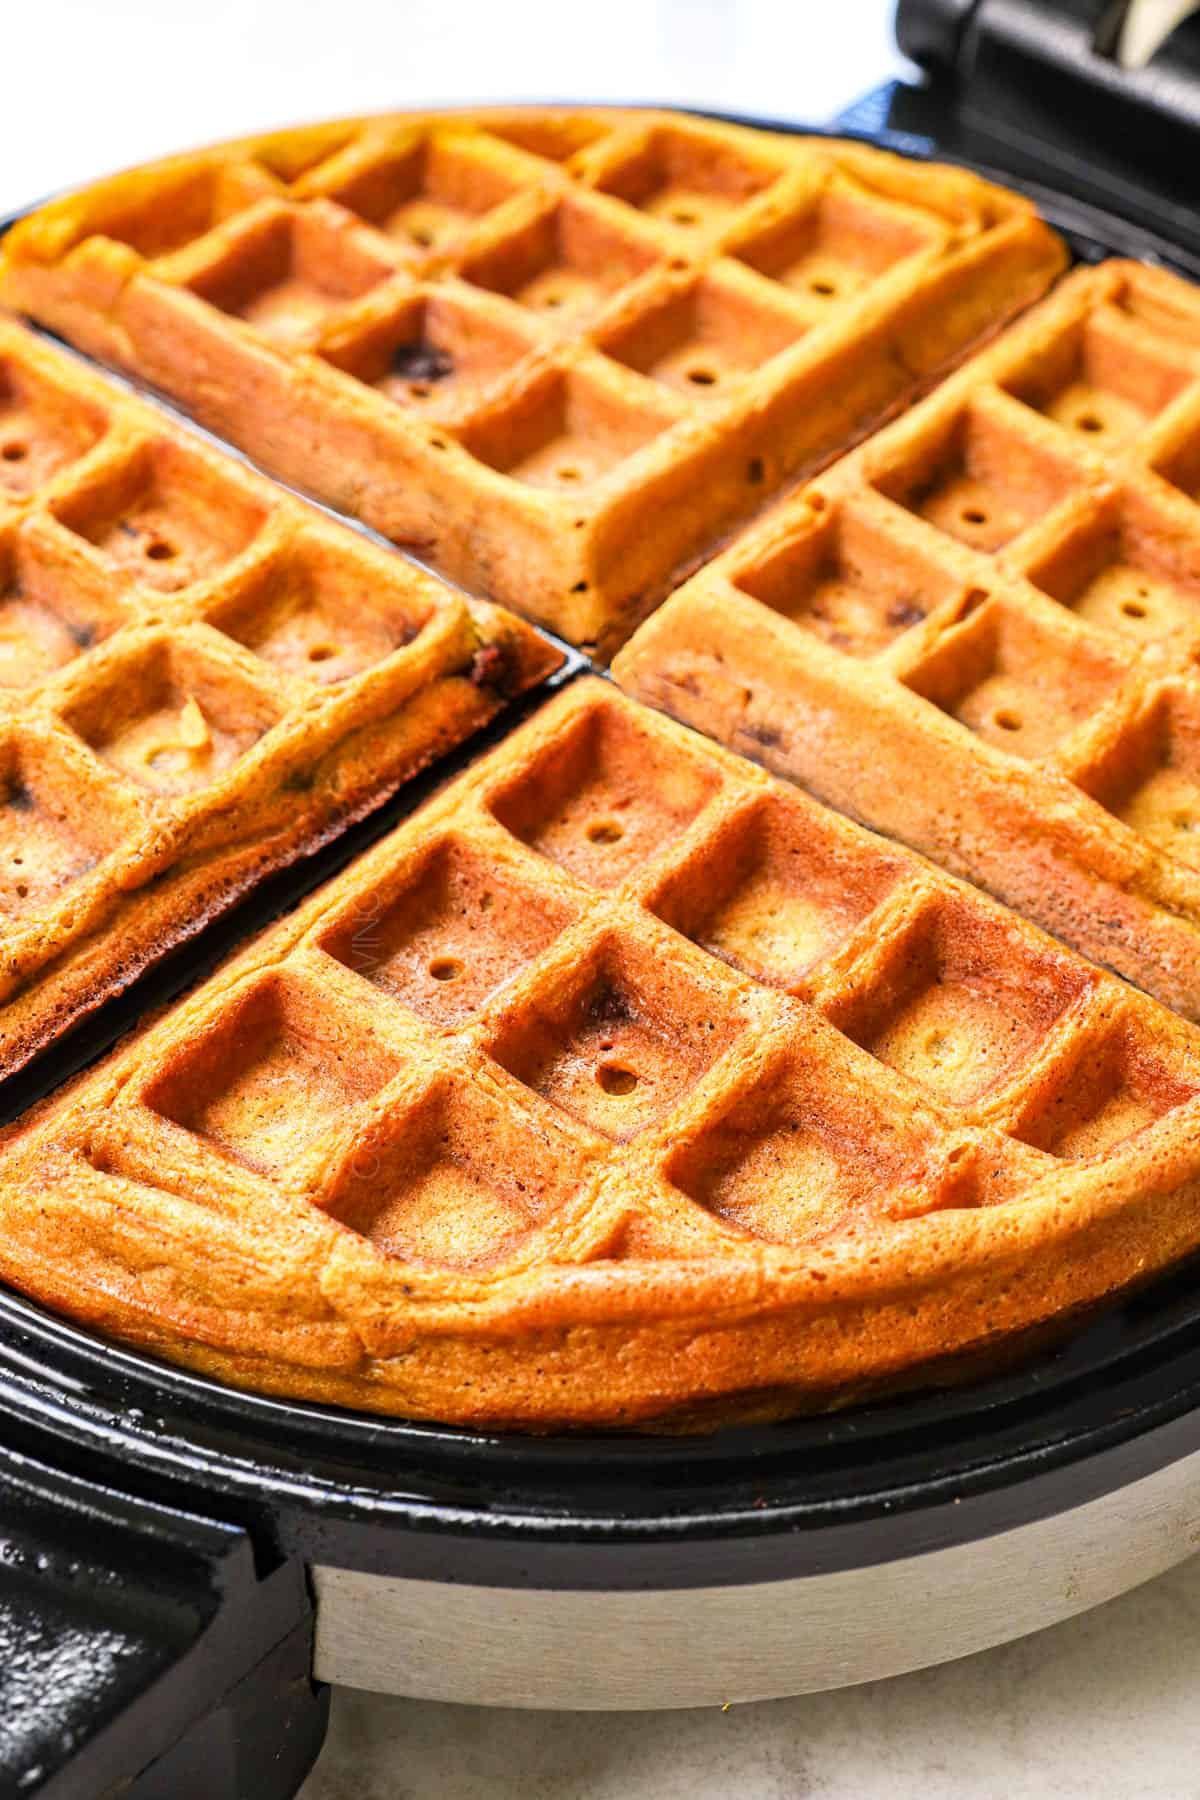 showing how to make pumpkin waffles extra crispy by cooking in the waffle iron longer